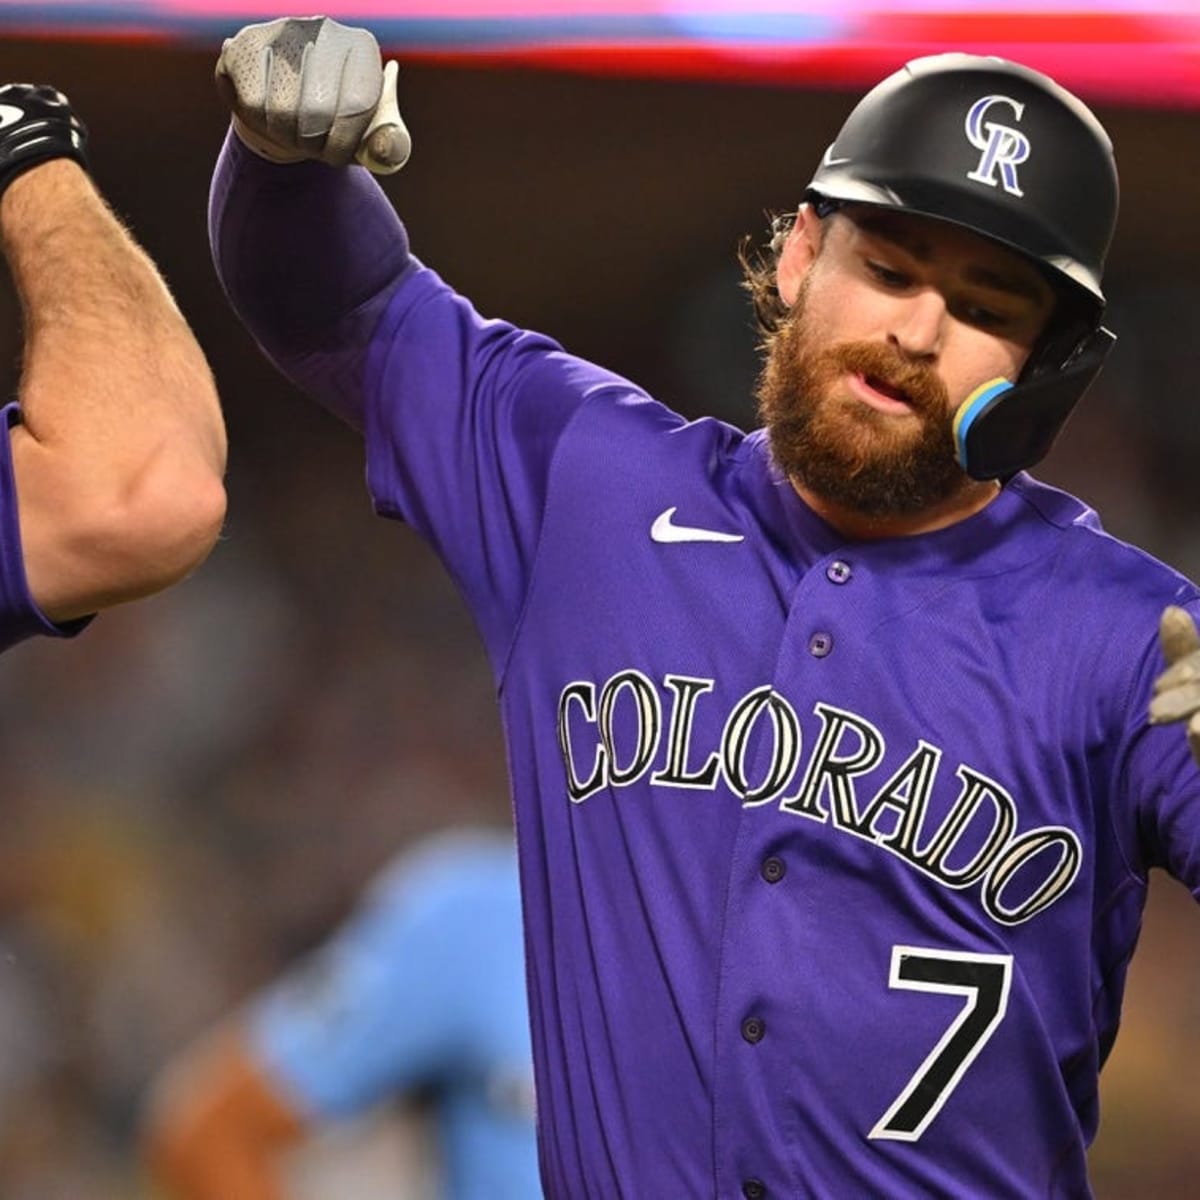 How to Watch the Rockies vs. Giants Game: Streaming & TV Info